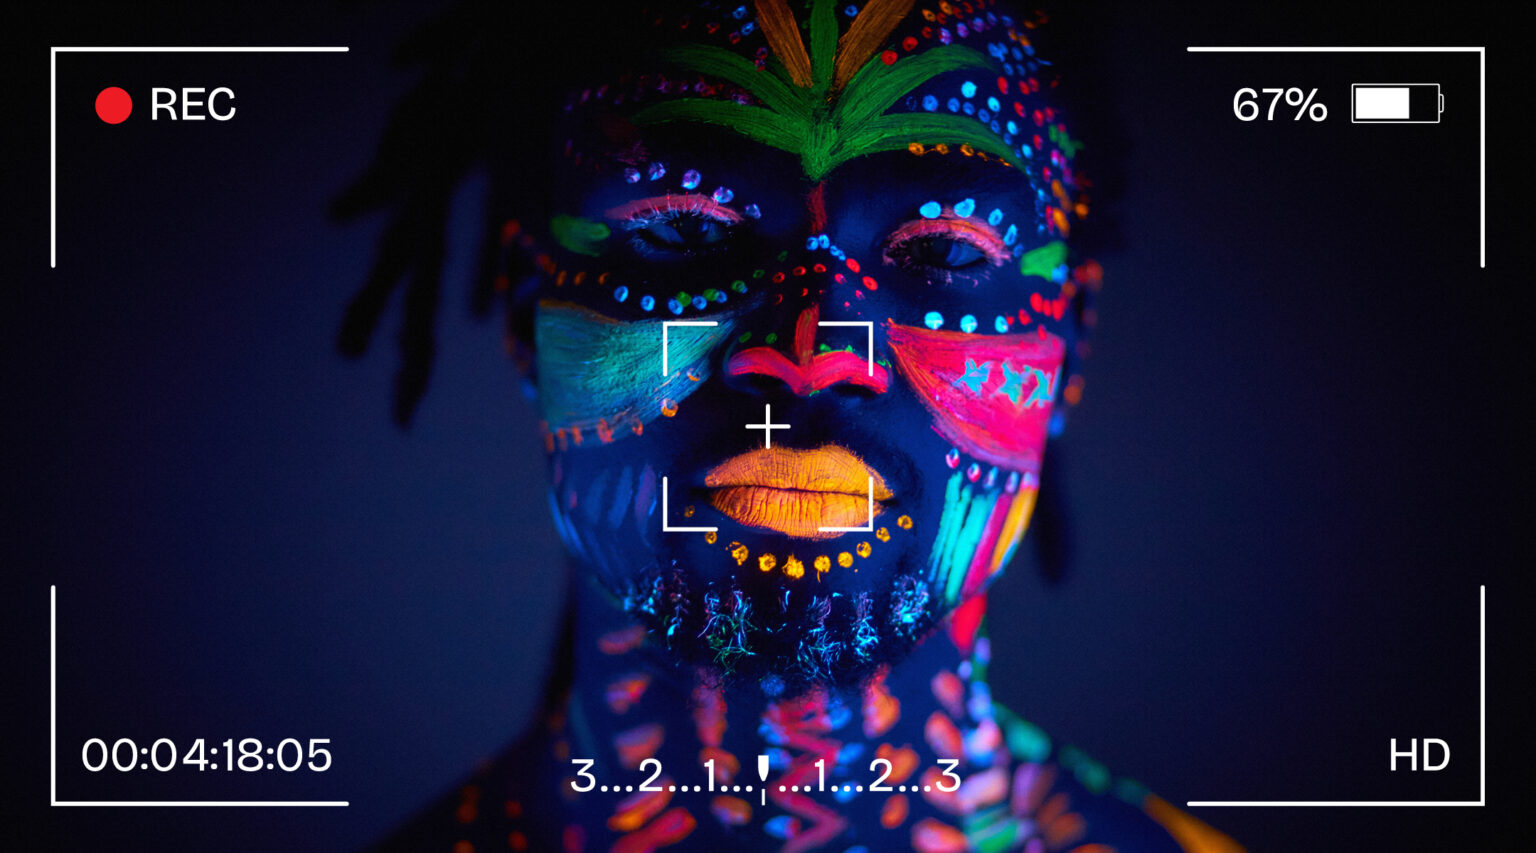 Granite Bay Graphic Design: Photography: Example of Portrait Photography: A Man’s Face with Brightly Colored Face Paint in Black Light